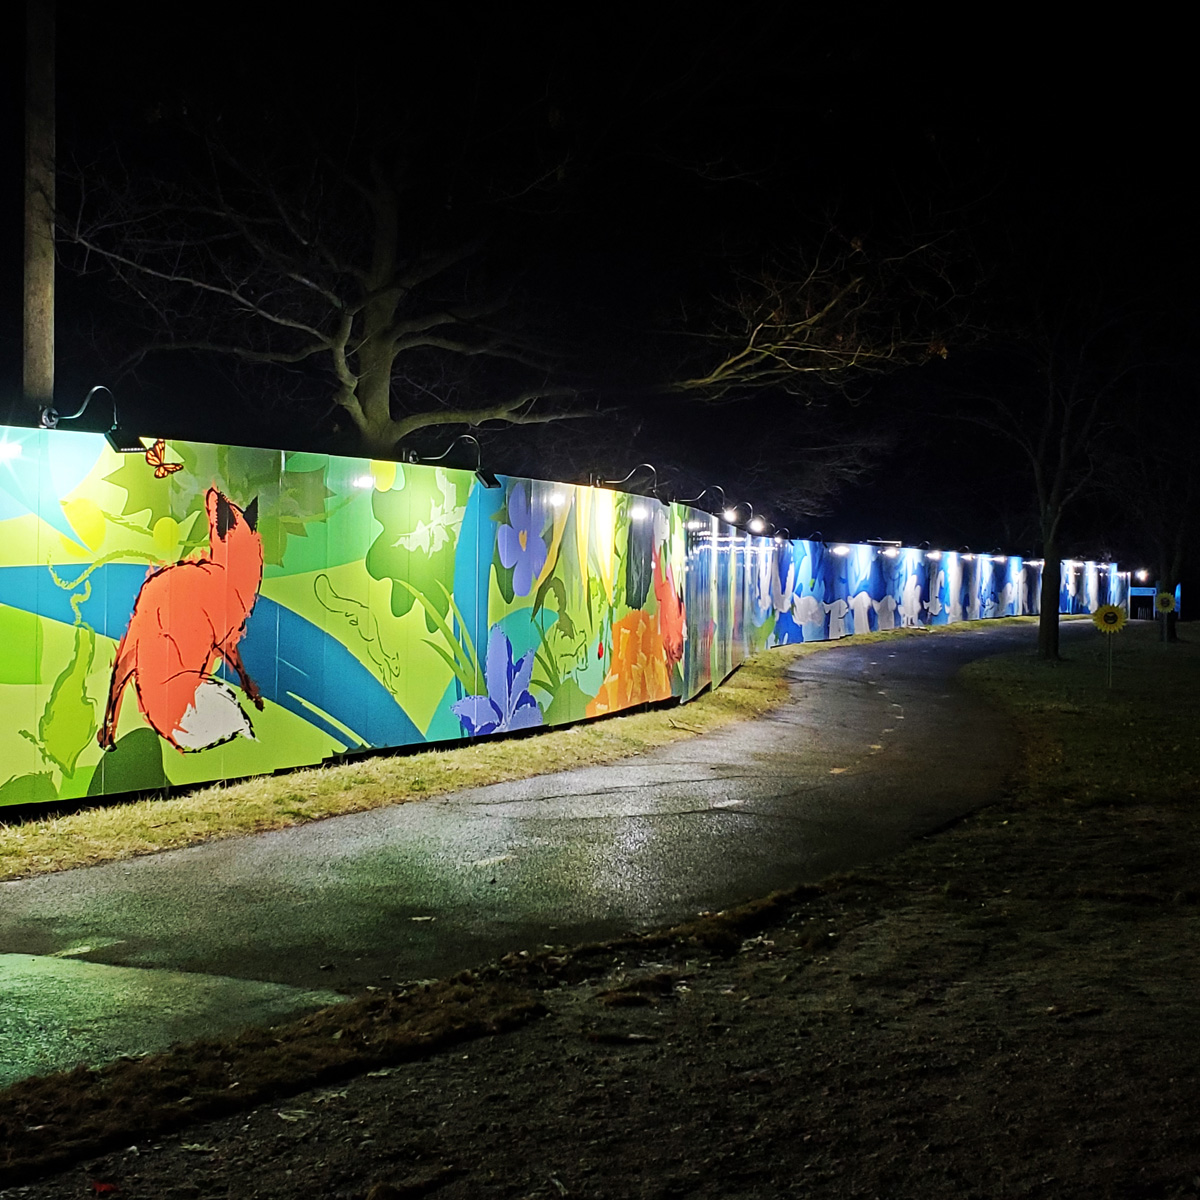 Lakeview Outdoor Construction Hoarding Lit at Night